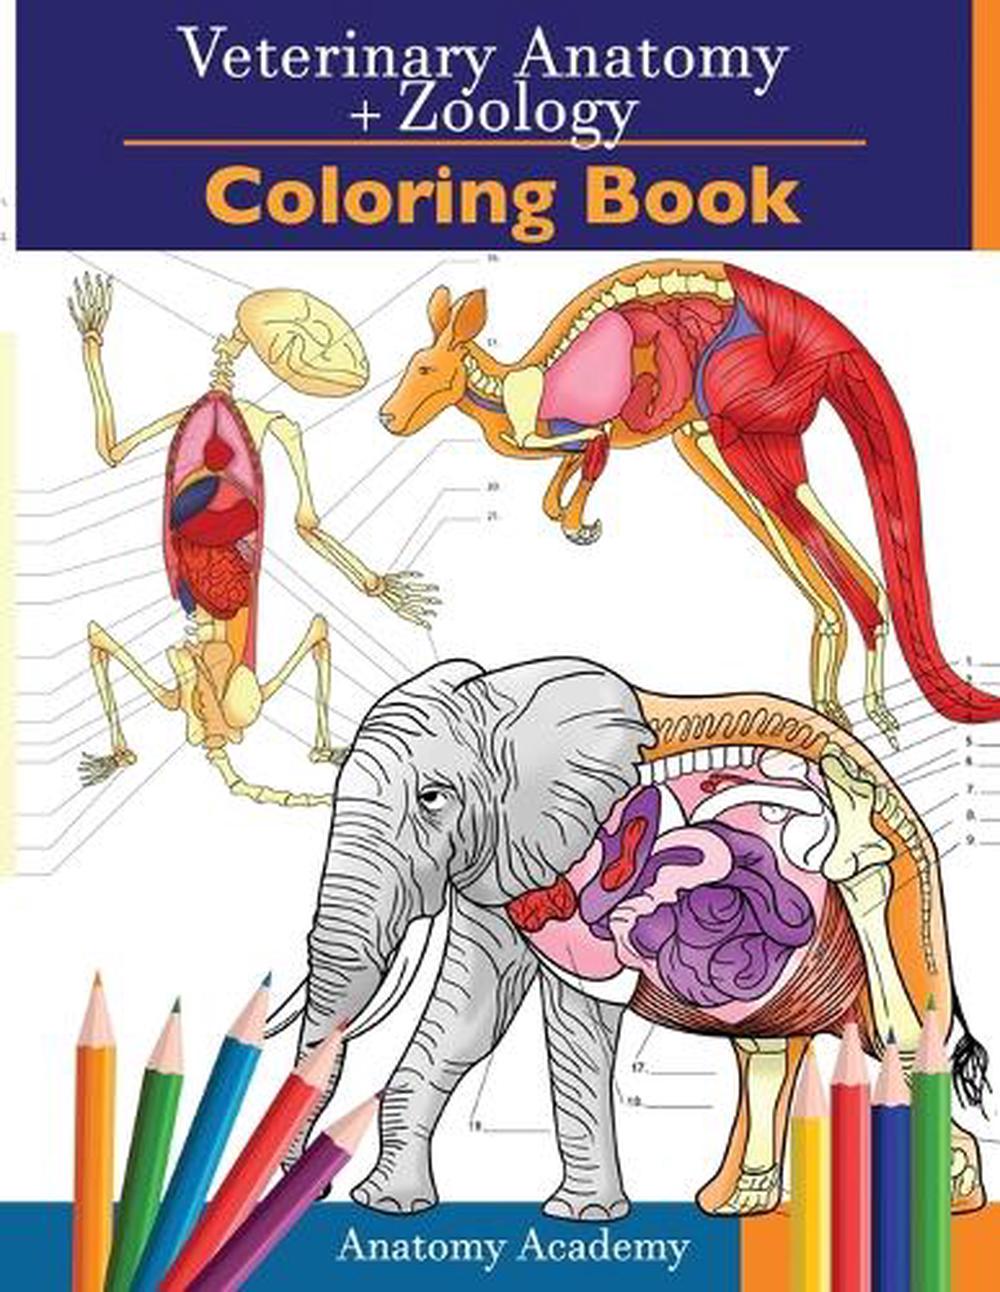 Download Veterinary & Zoology Coloring Book by Academy Anatomy ...